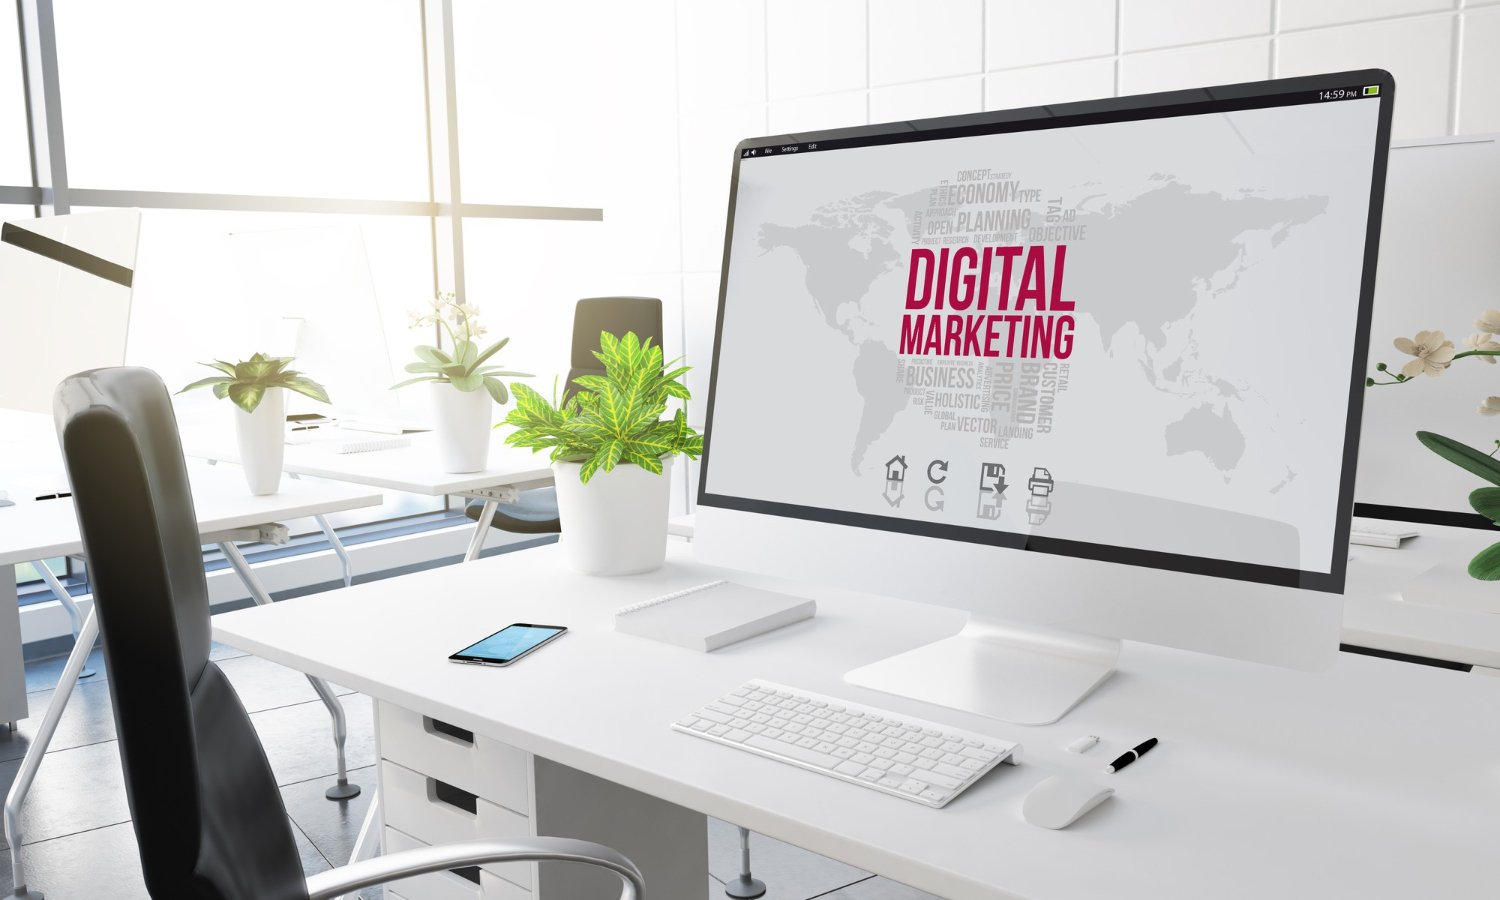 Digital Marketing Why is Important for Small Business